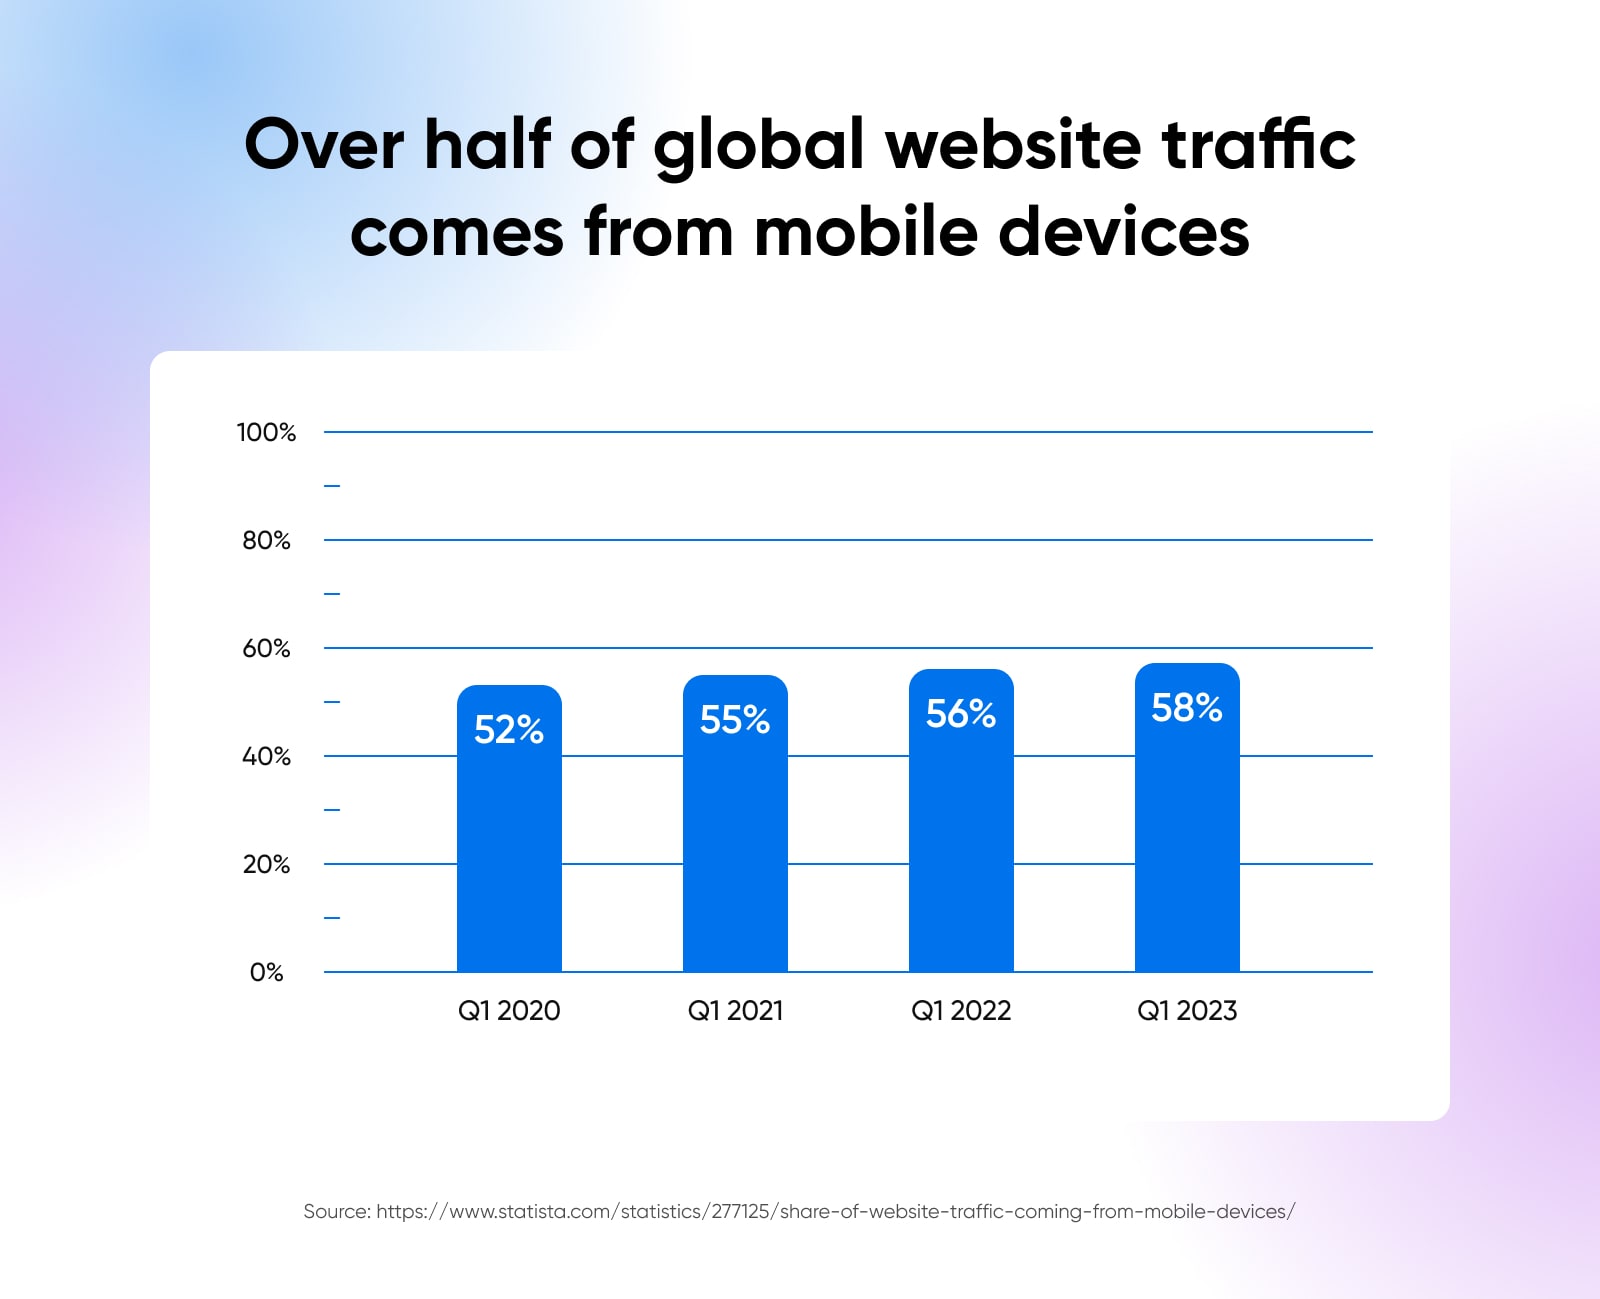 Over half of global website traffic comes from mobile devices